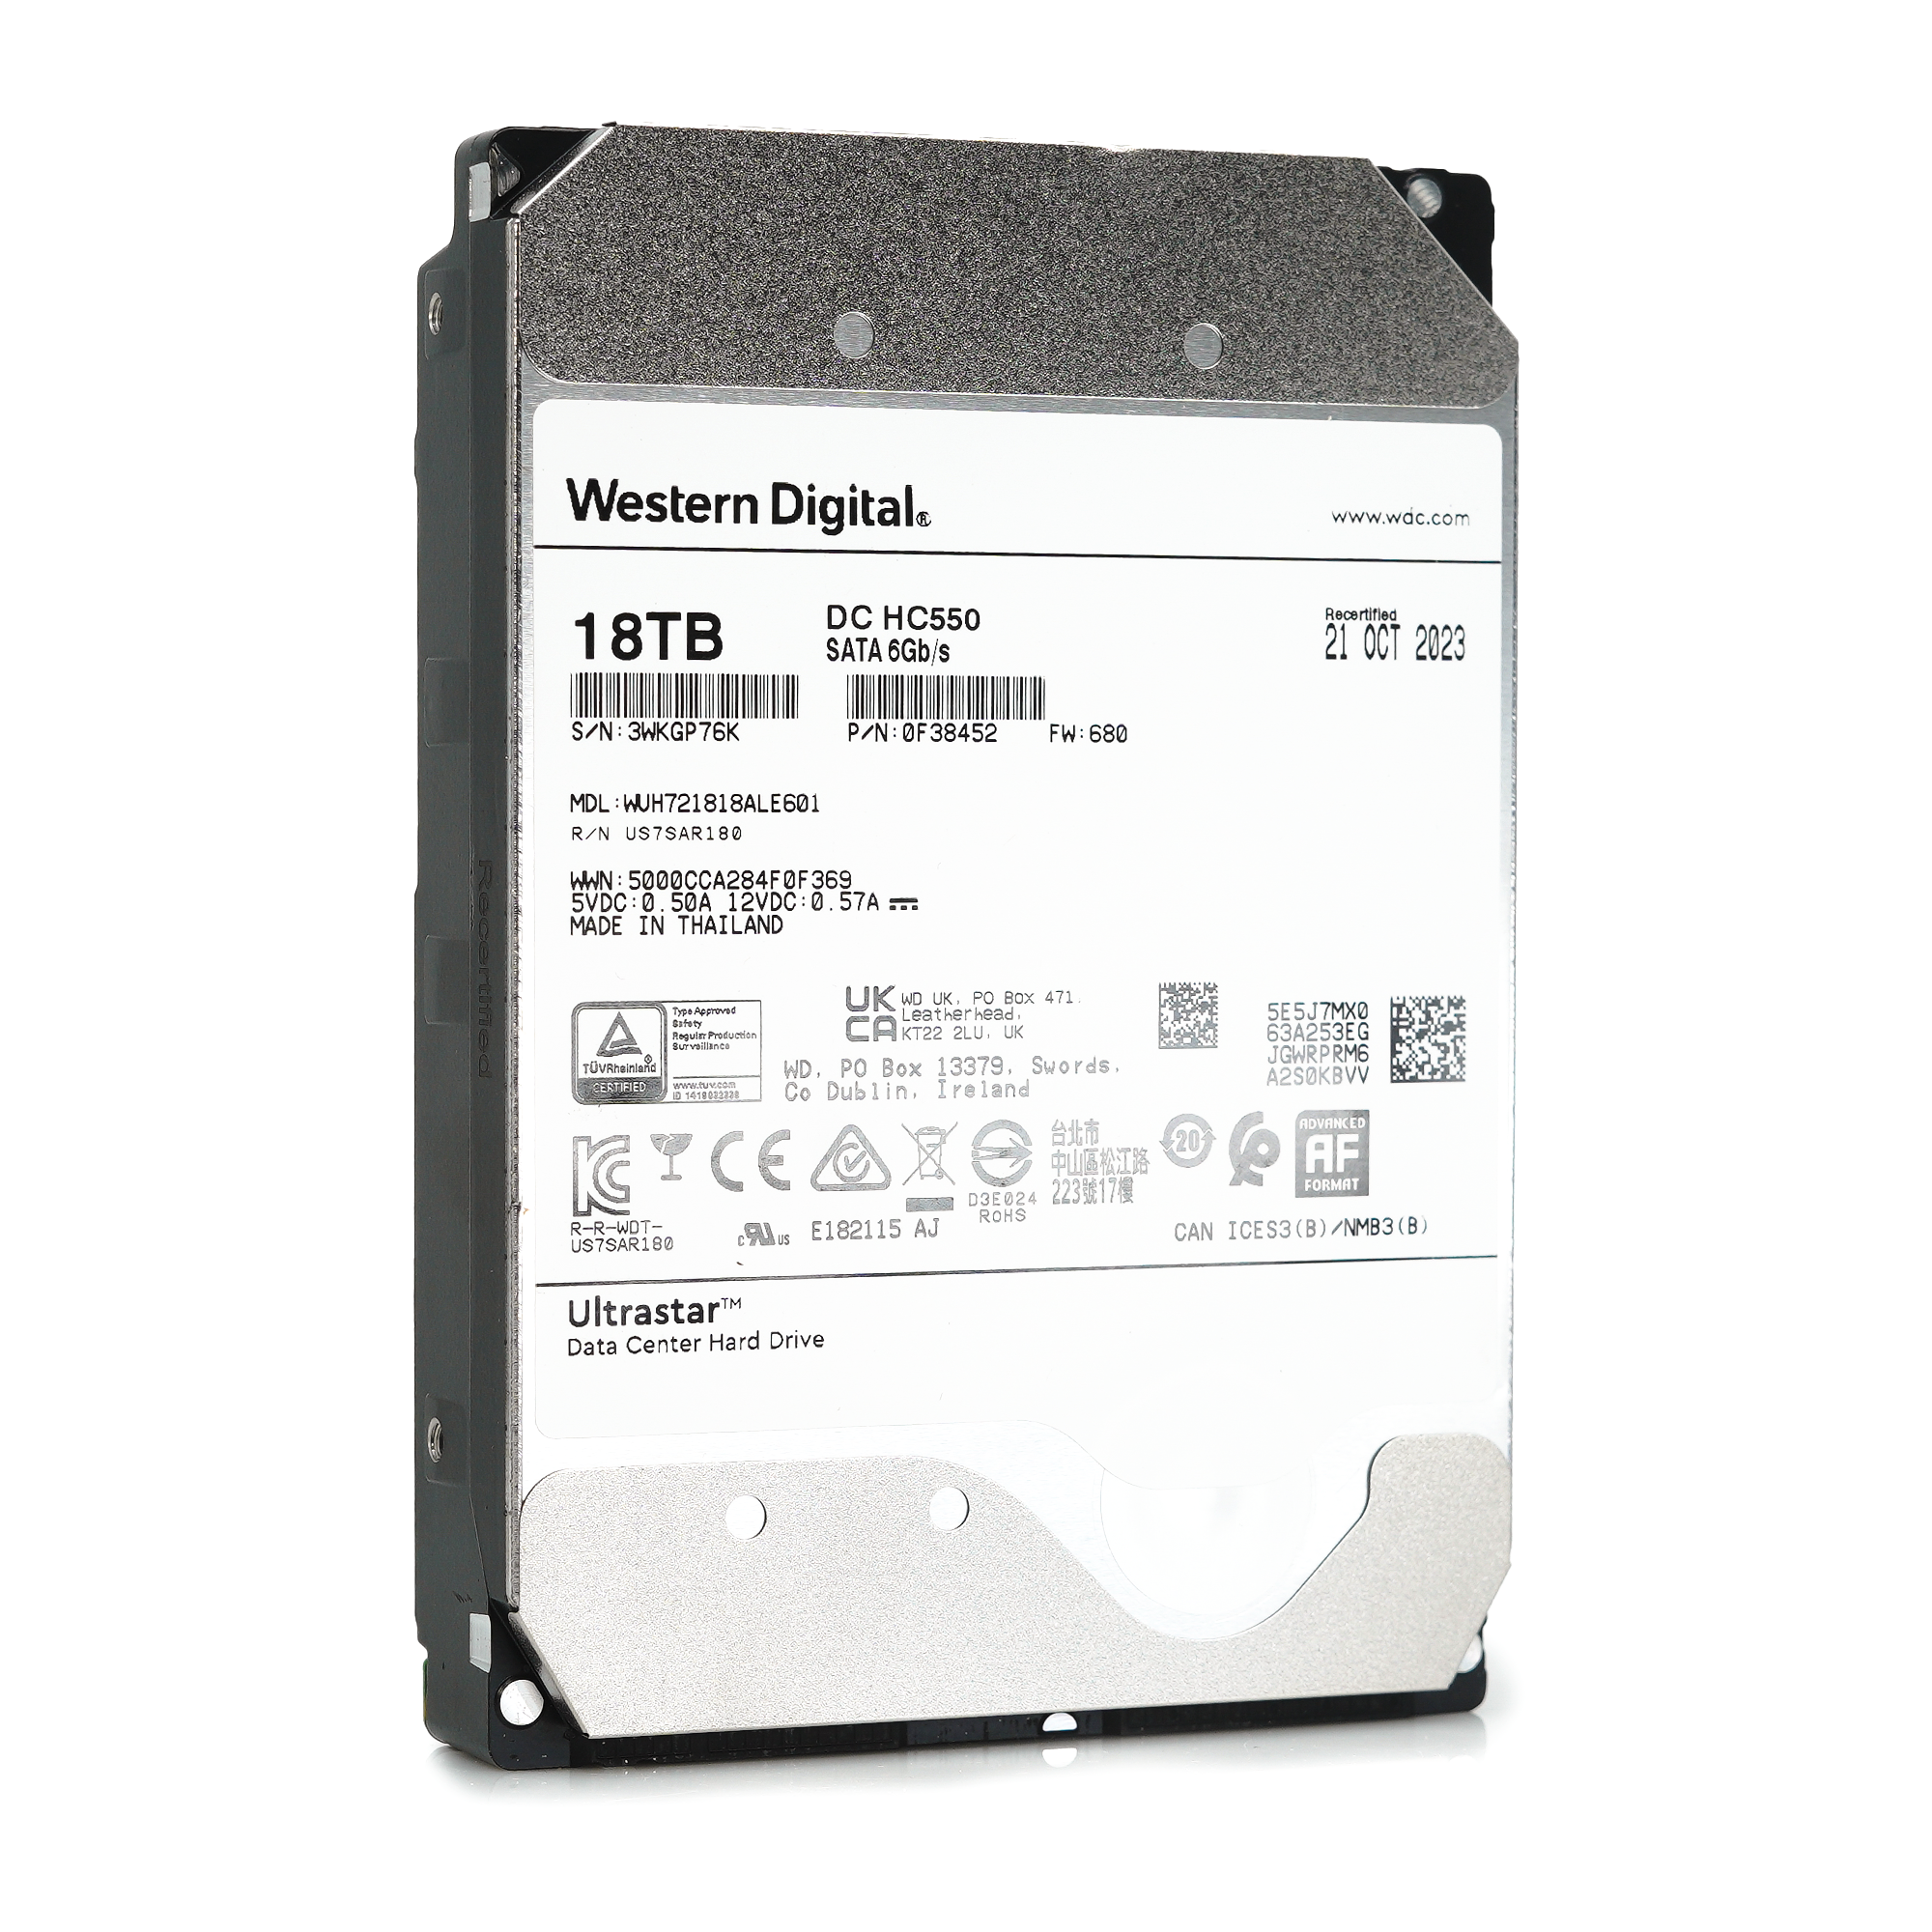 Western Digital Ultrastar DC HC550 WUH721818ALE601 0F38452 18TB 7.2K RPM SATA 6Gb/s 512e TCG-Enterprise SED Power Disable 3.5in Recertified Hard Drive - Front Angle View